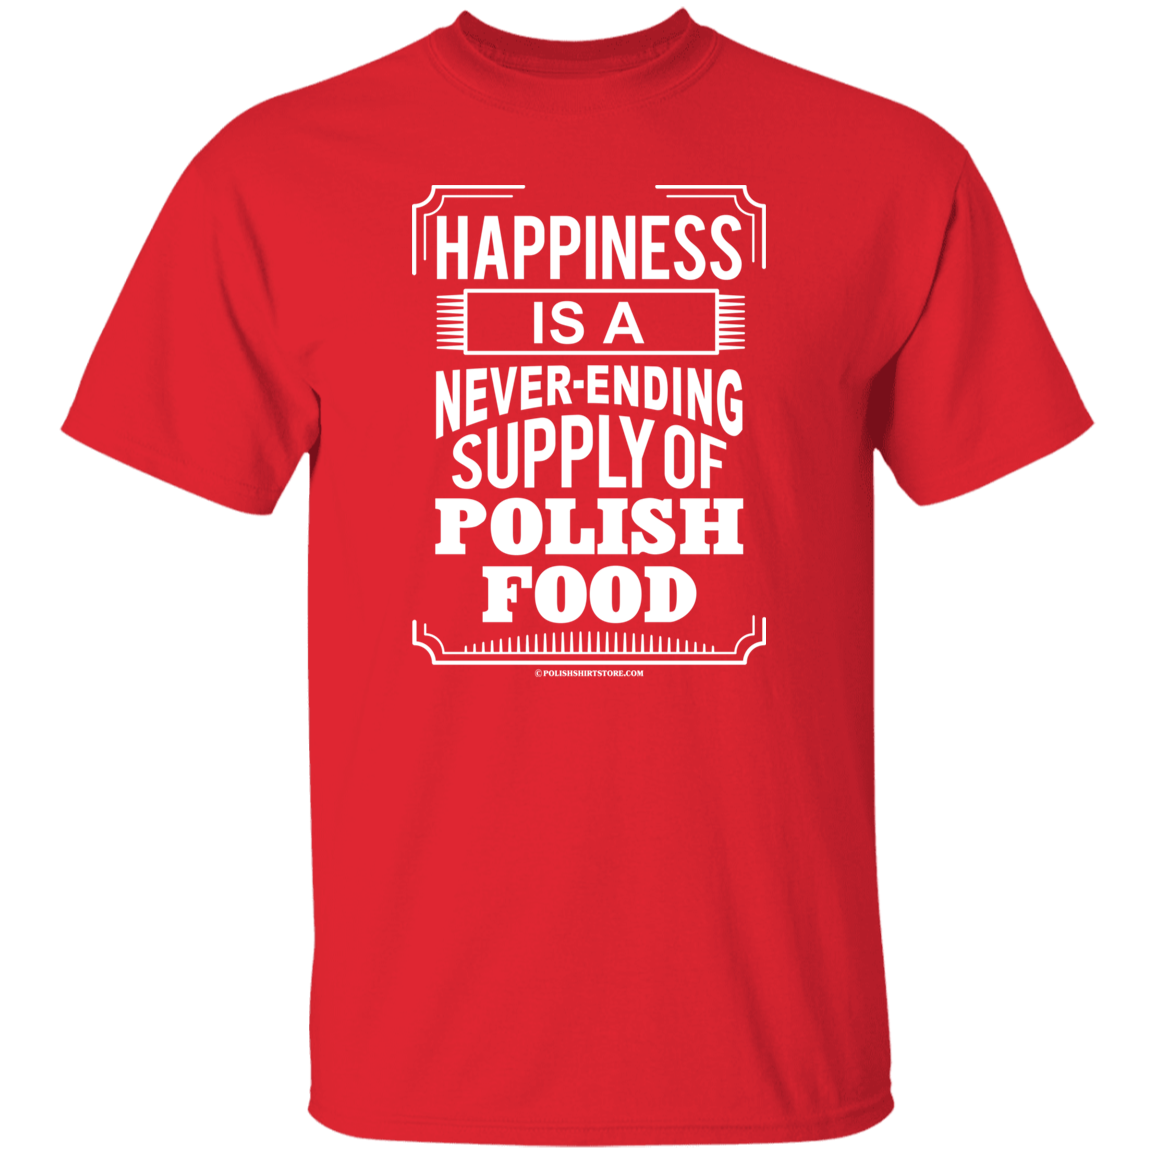 Happiness Is A Never Ending Supply Of Polish Food Apparel CustomCat G500 5.3 oz. T-Shirt Red S